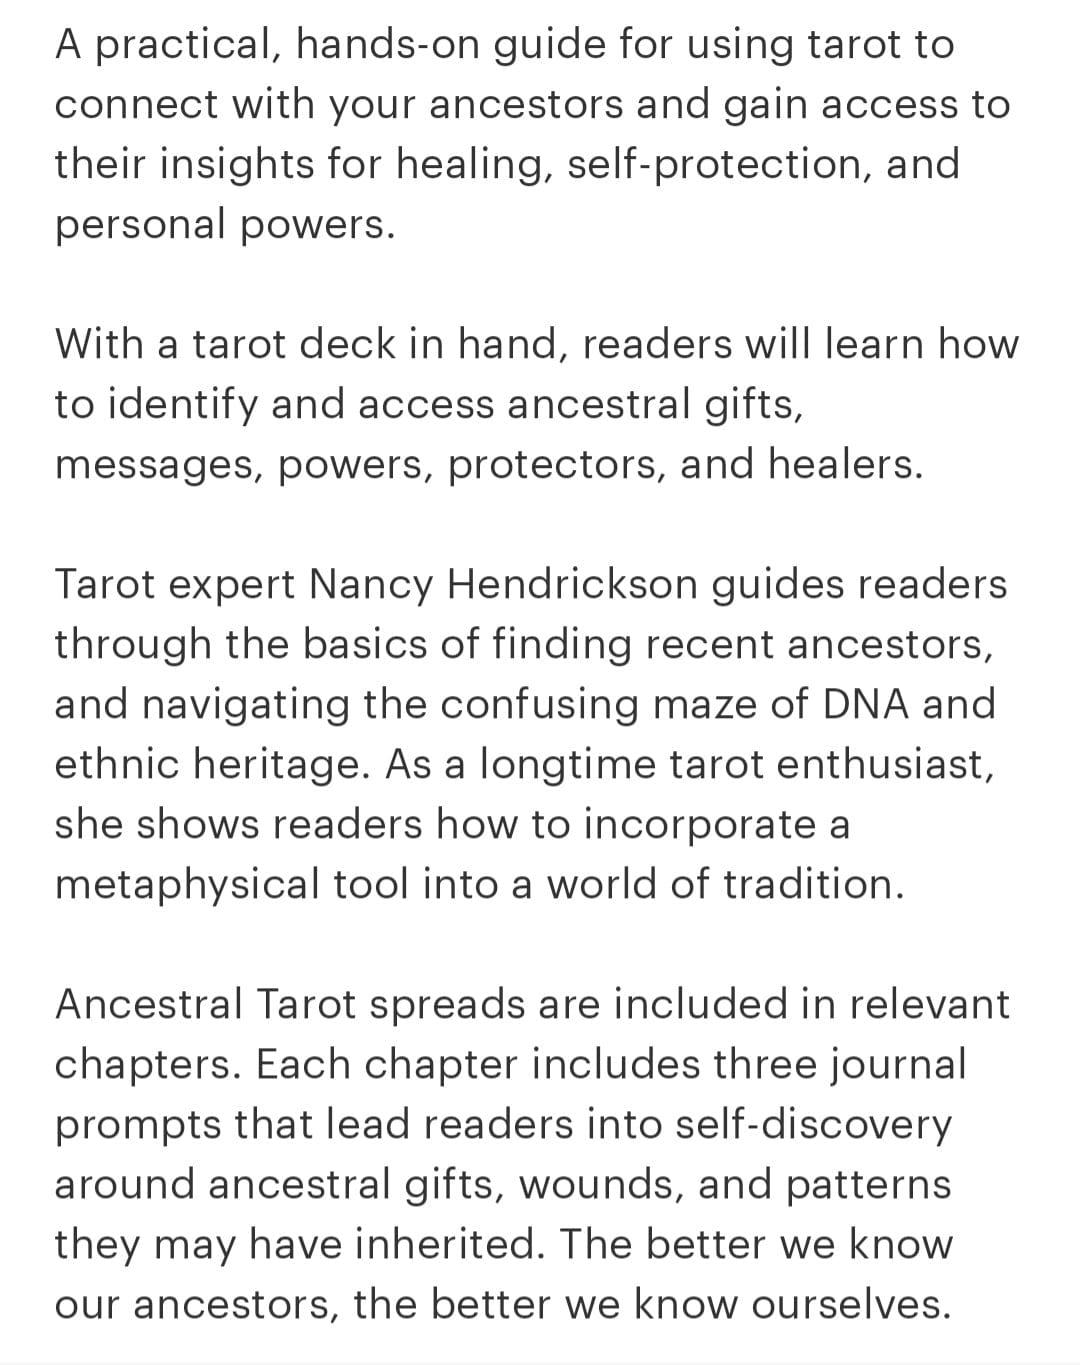 Ancestral Tarot: Uncover Your Past and Chart Your Future by Nancy Hendrickson